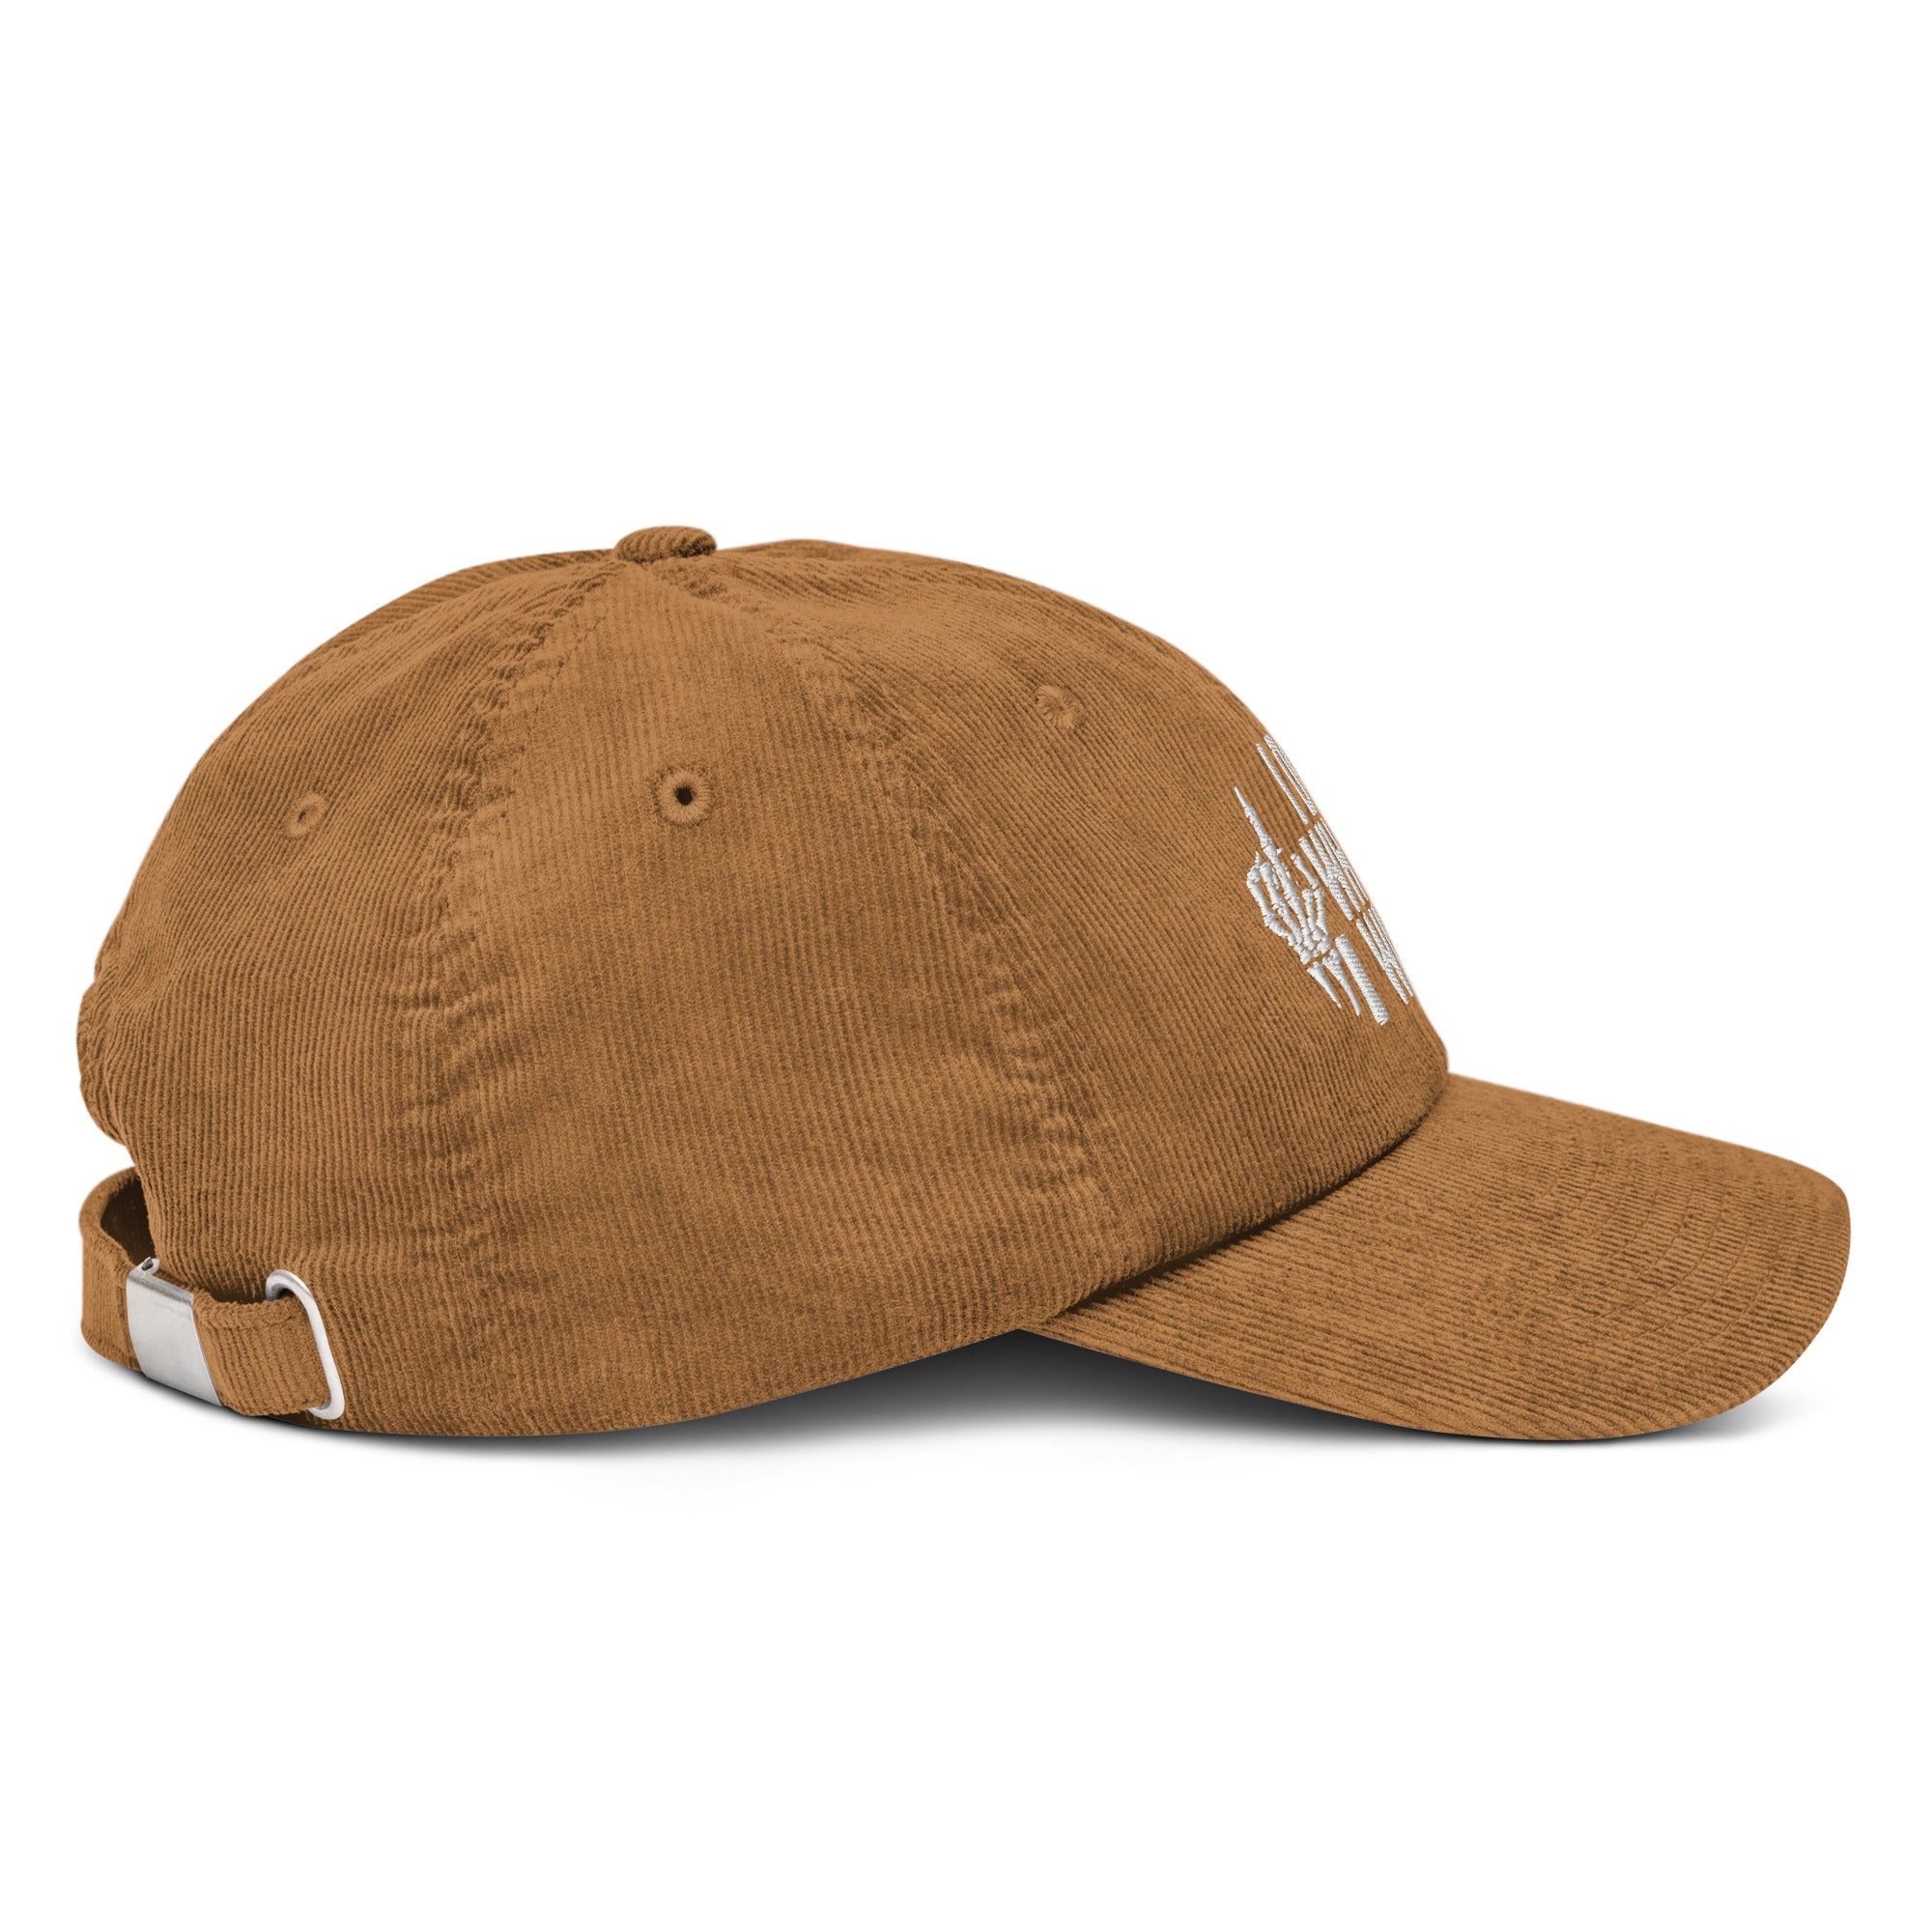 I Do What I Want Corduroy Hat - Ty0510221